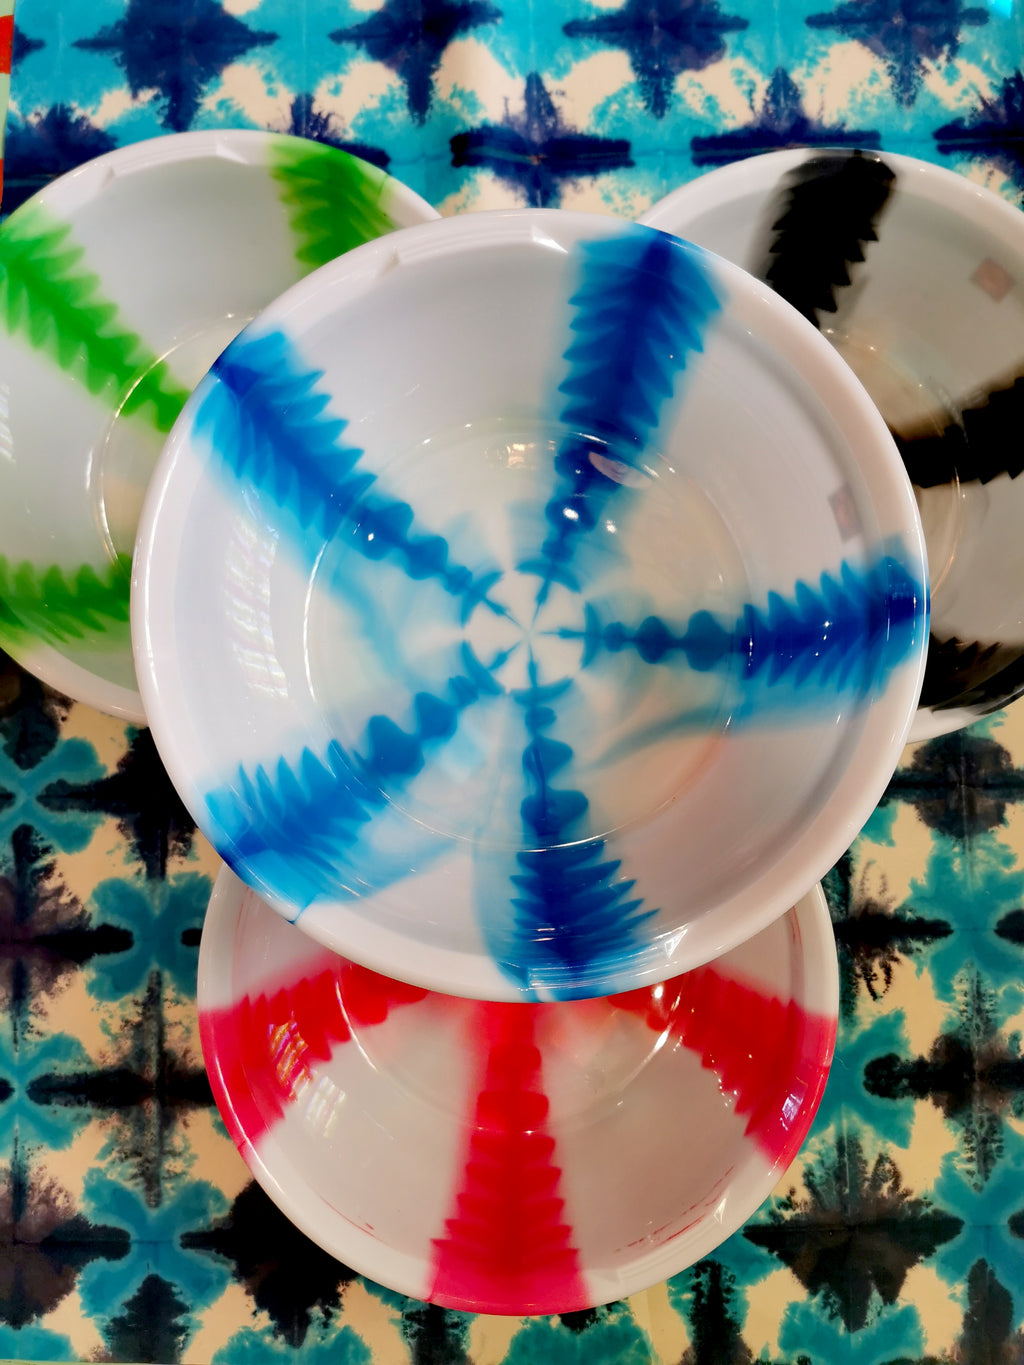 Gorgeous recycled plastic washing up bowls marvelous marbled colours, all vary a little in pattern.

35cm x 35cm x 13.5cm

